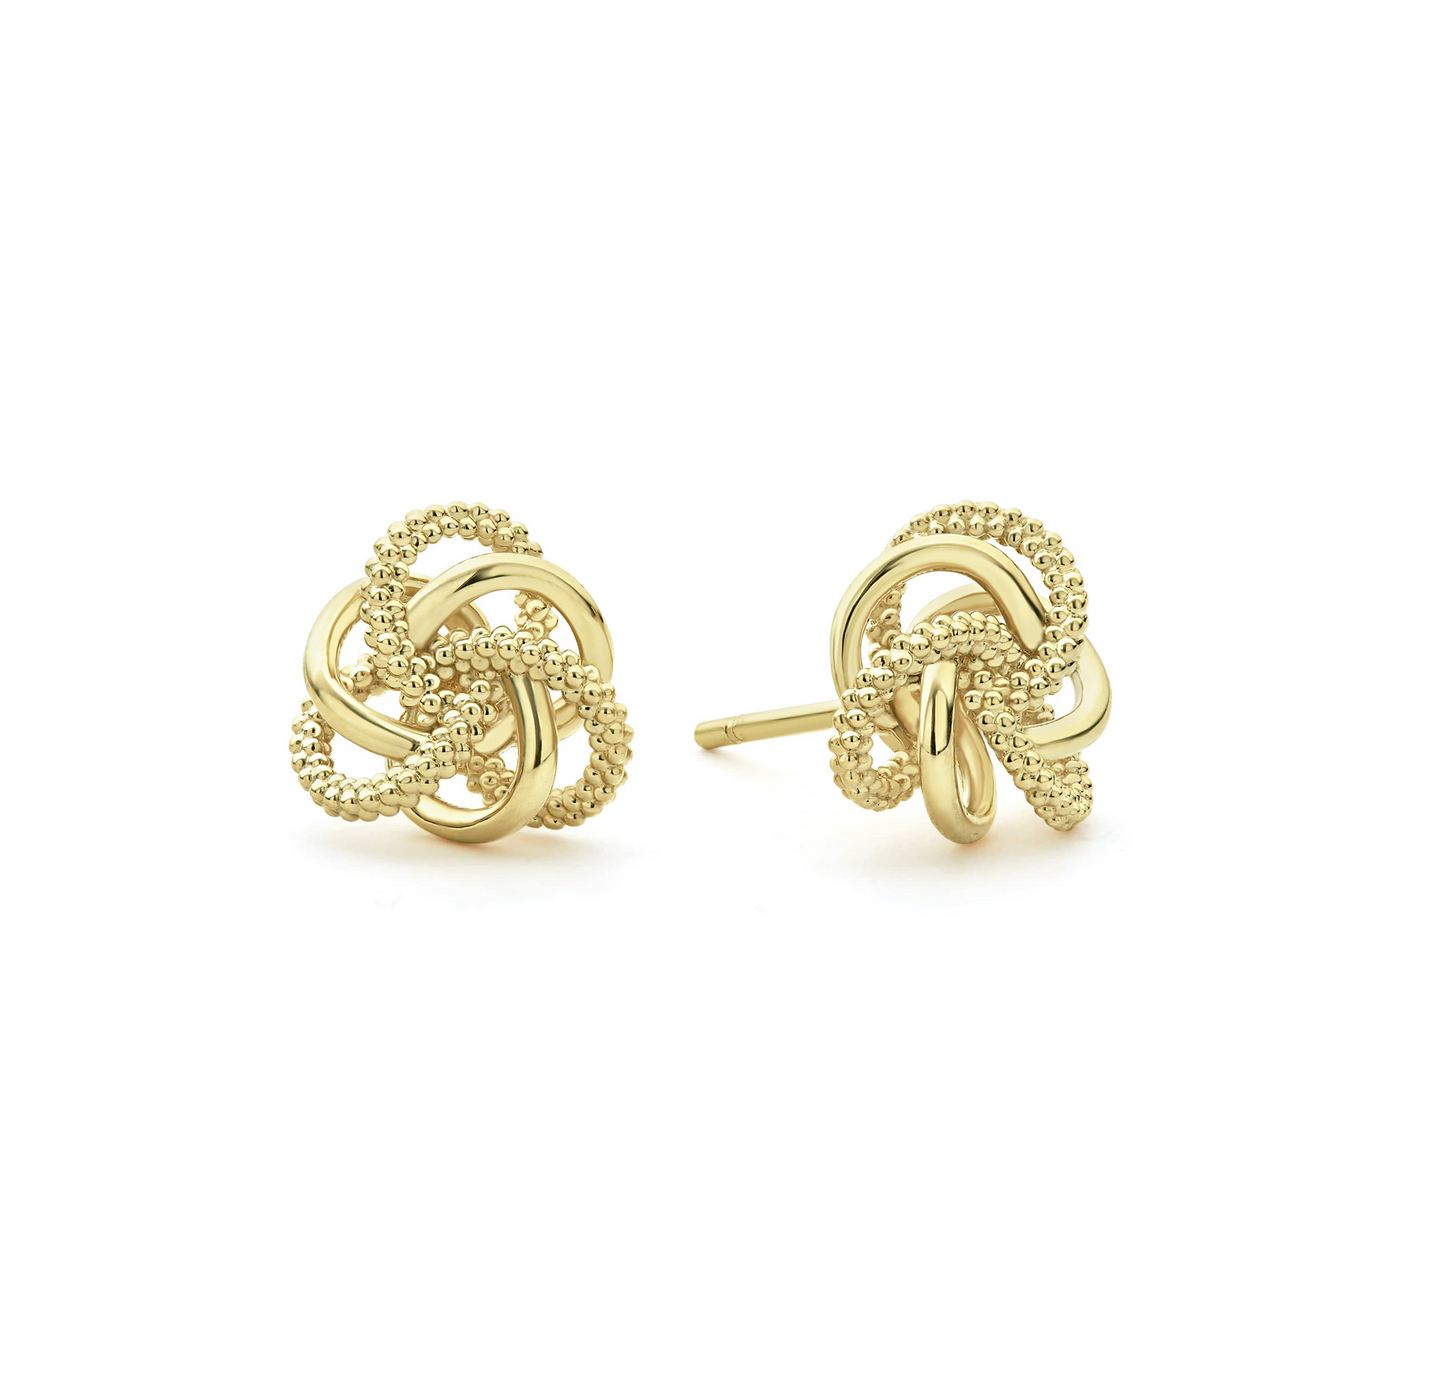 LAGOS Love Knot Large Gold Stud Earrings